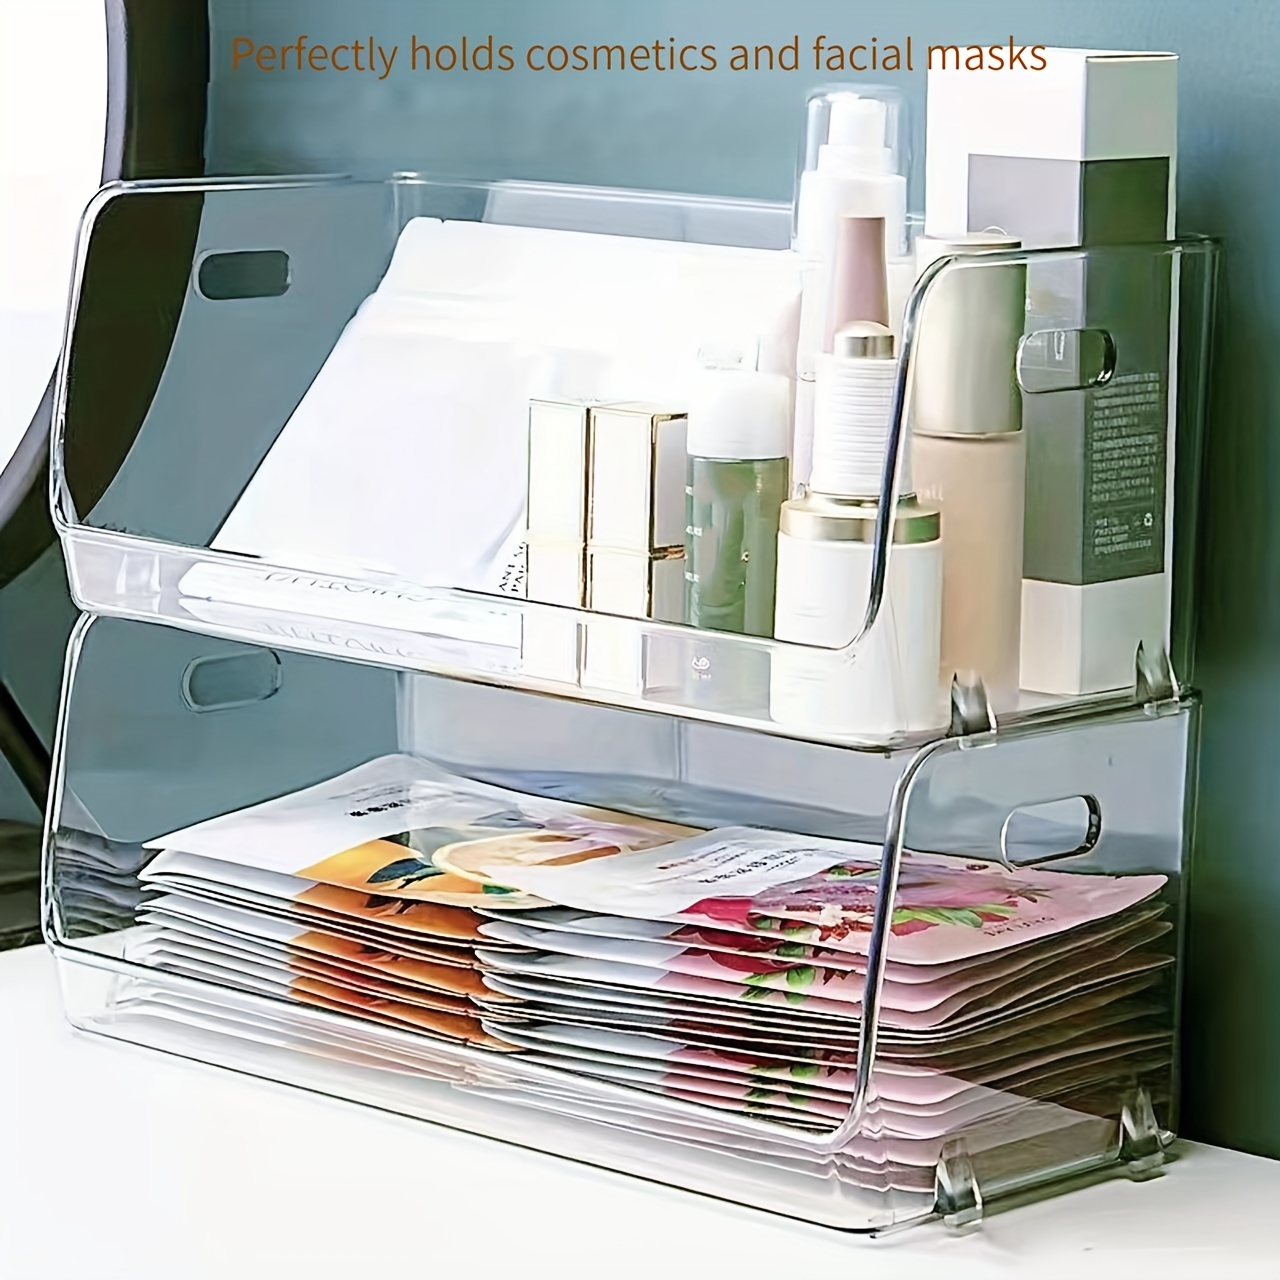 

1pc Multi-functional Transparent Stackable Desktop Shelf For Cosmetics And Skin Care Products - Hollow Handle Design For Easy Use - Perfect For Home And Dormitory Storage, Makeup Organizer